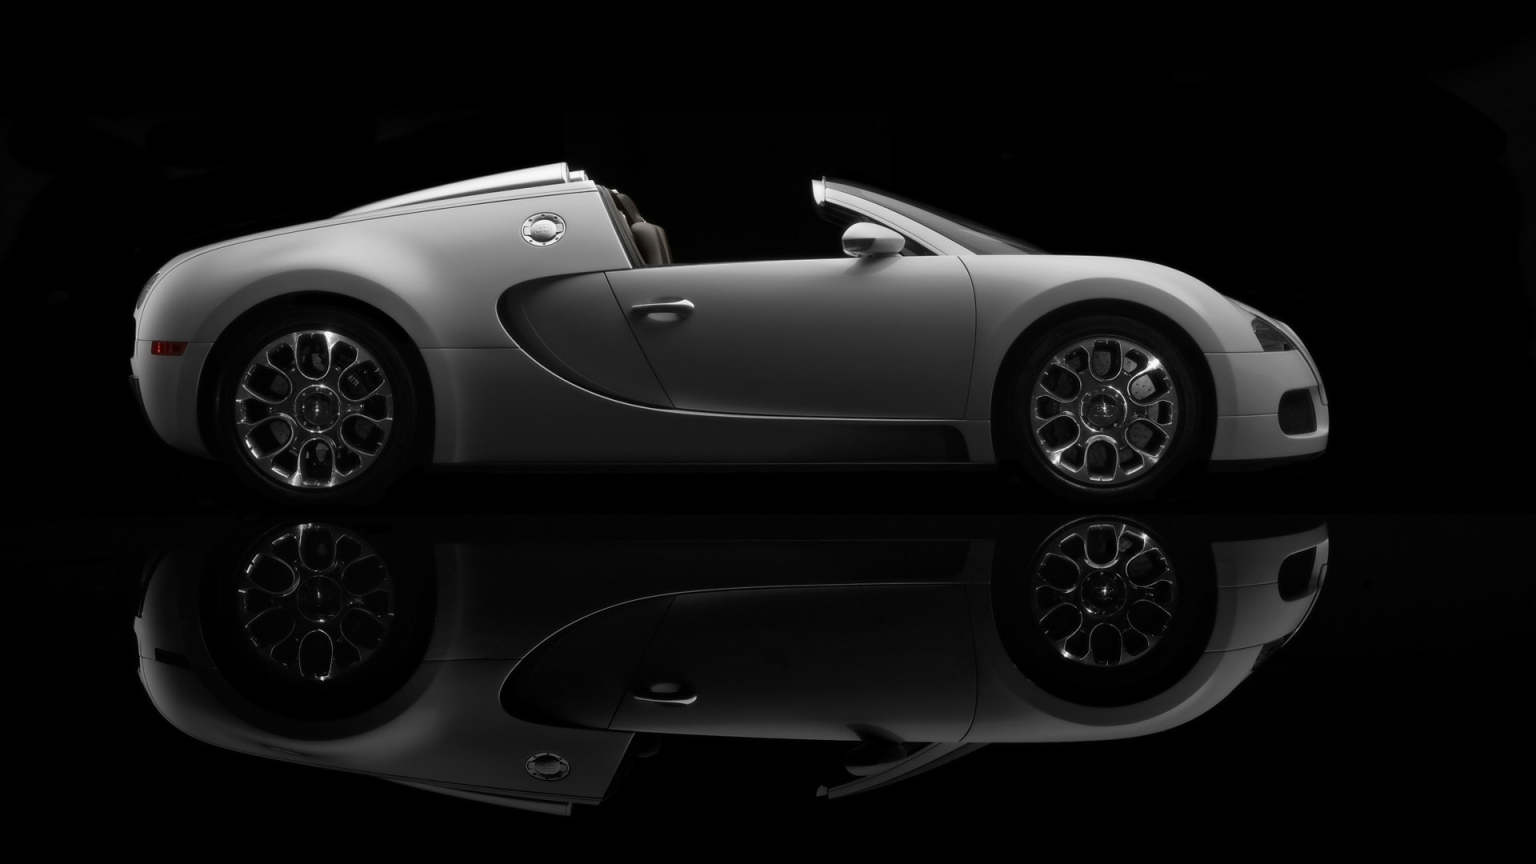 Bugatti Veyron 16.4 Grand Sport Production 2009 Version - Side Topless for 1536 x 864 HDTV resolution